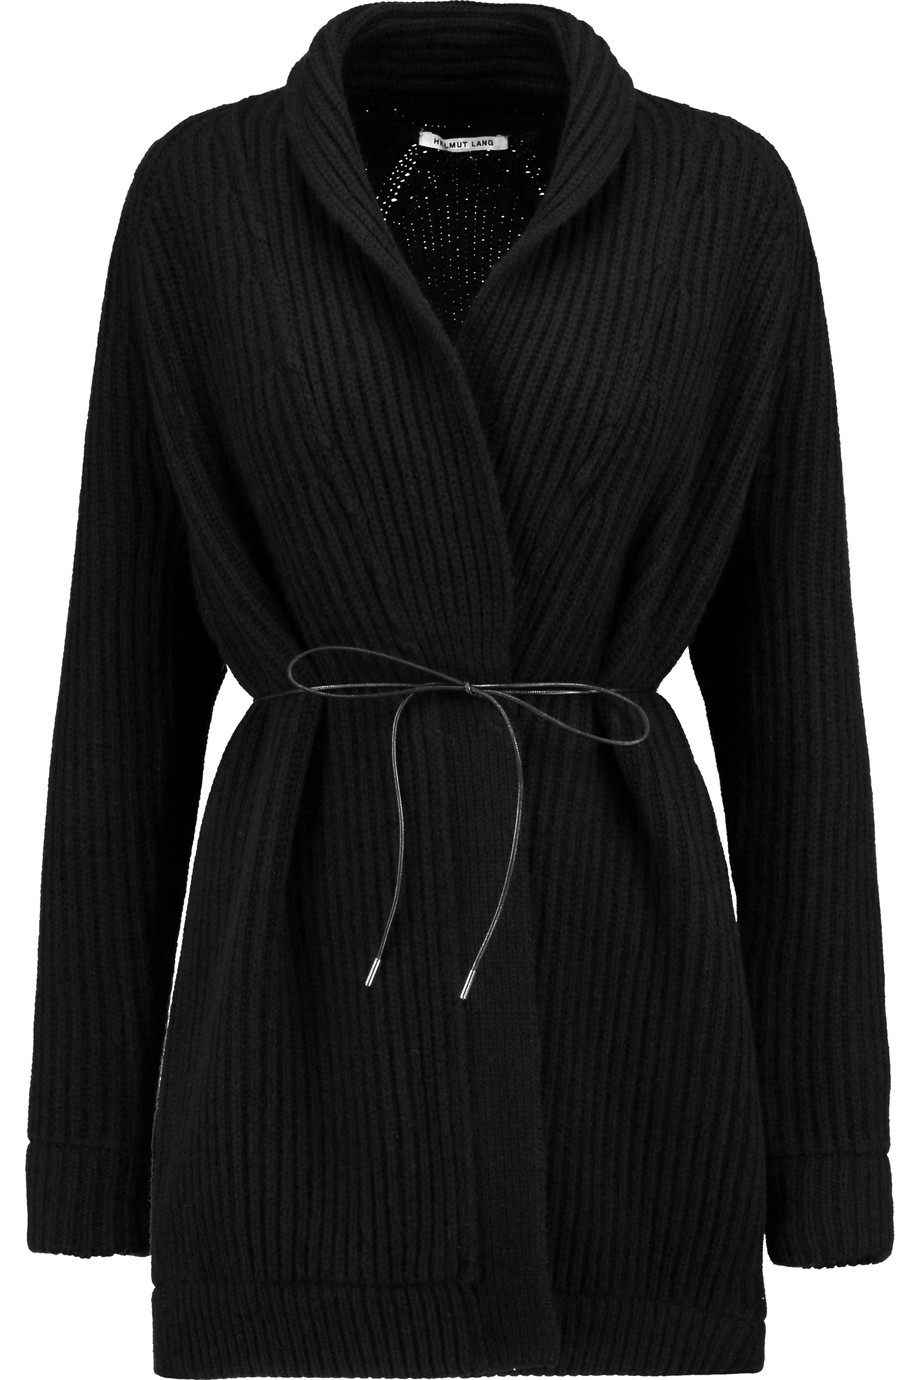 Helmut Lang Cable-knit Wool And Cashmere Cardigan | ModeSens